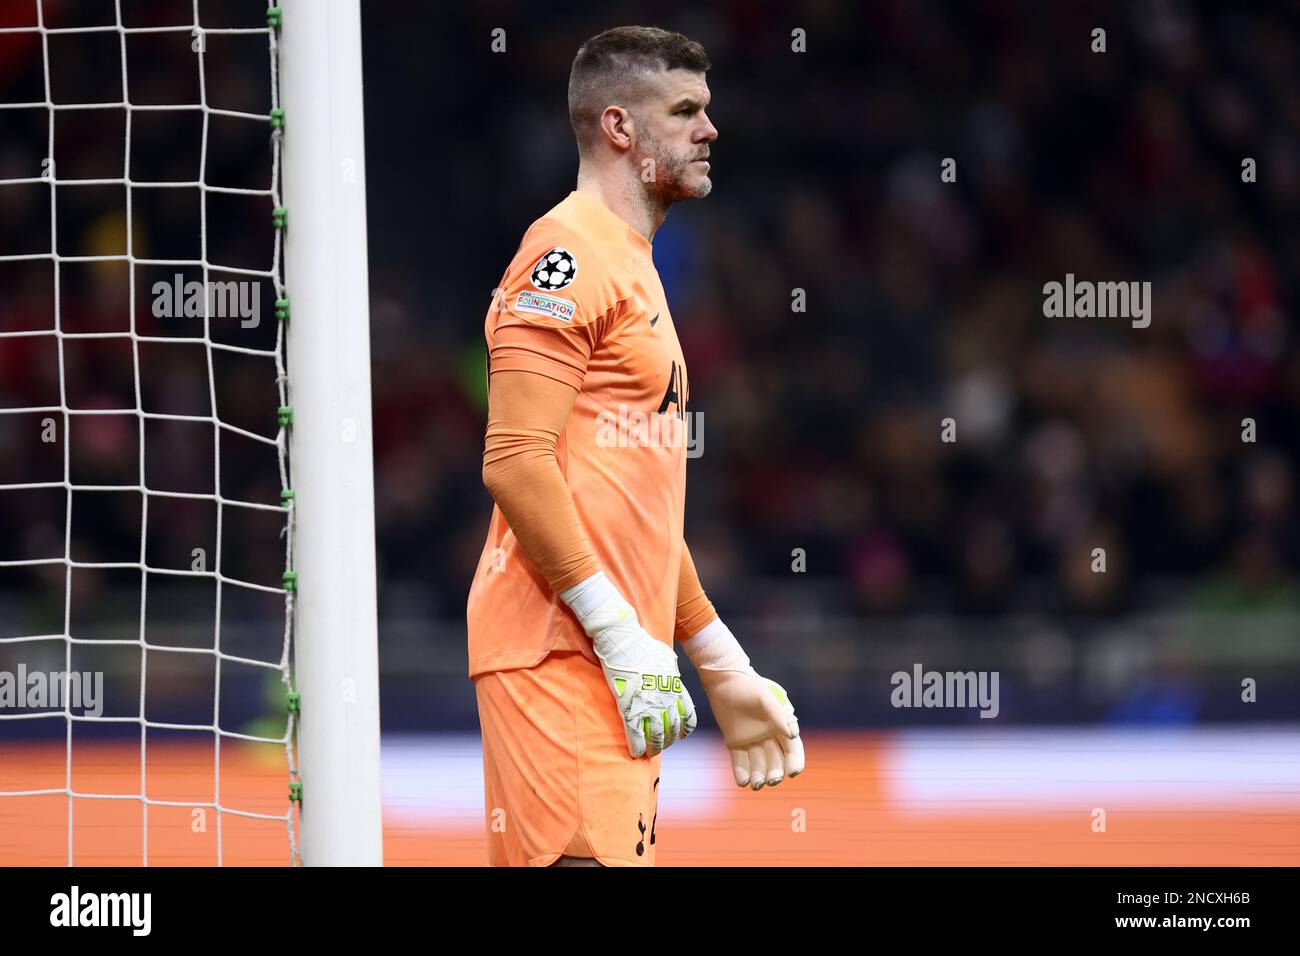 Milan, Italy. February 14, 2023, Fraser Forster of Tottenham Hotspur Fc controls the ball during the UEFA Champions League round of 16 leg one match between AC Milan and Tottenham Hotspur at Giuseppe Meazza Stadium on February 14, 2023 in Milan, Italy. Stock Photo